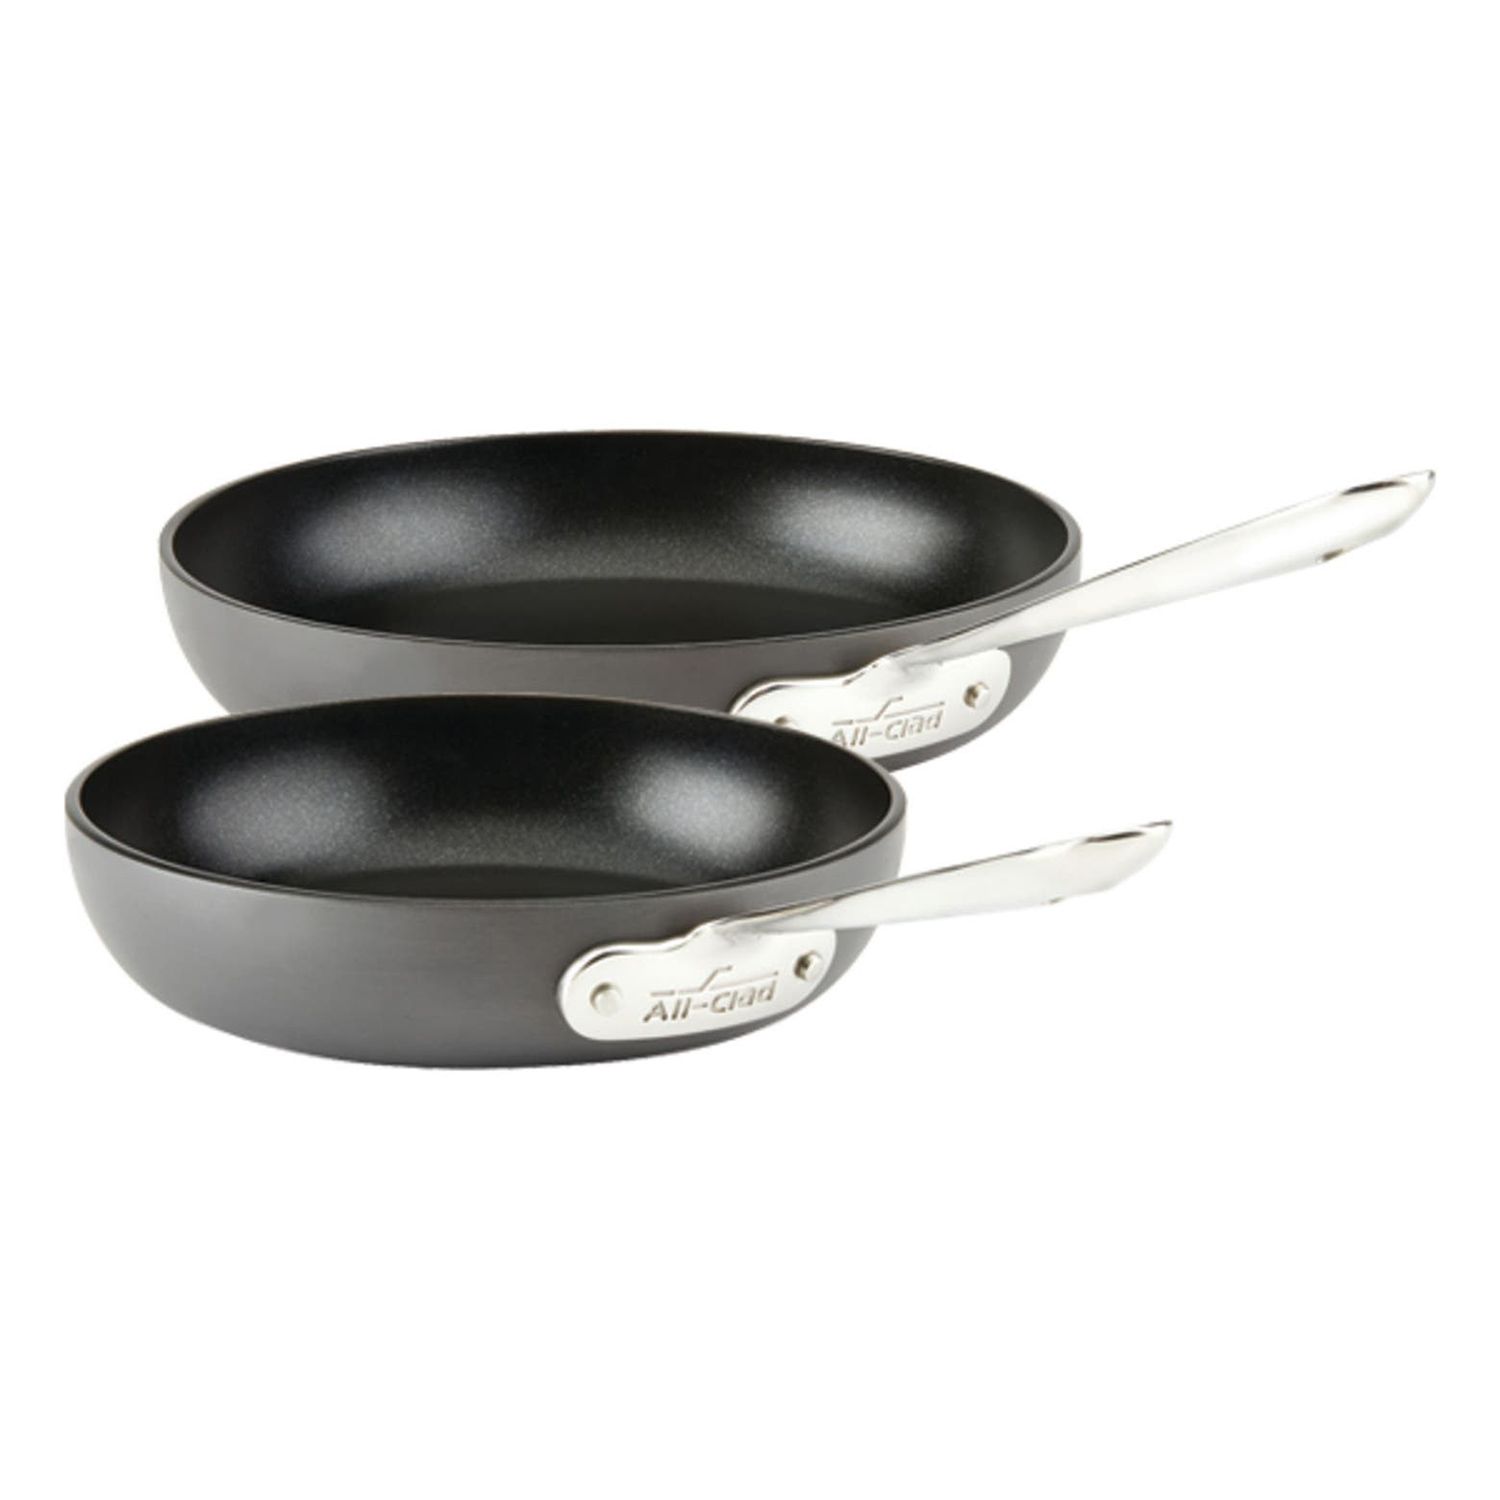 All Clad 8-Inch & 10-Inch Hard Anodized Aluminum Nonstick Fry Pan Set